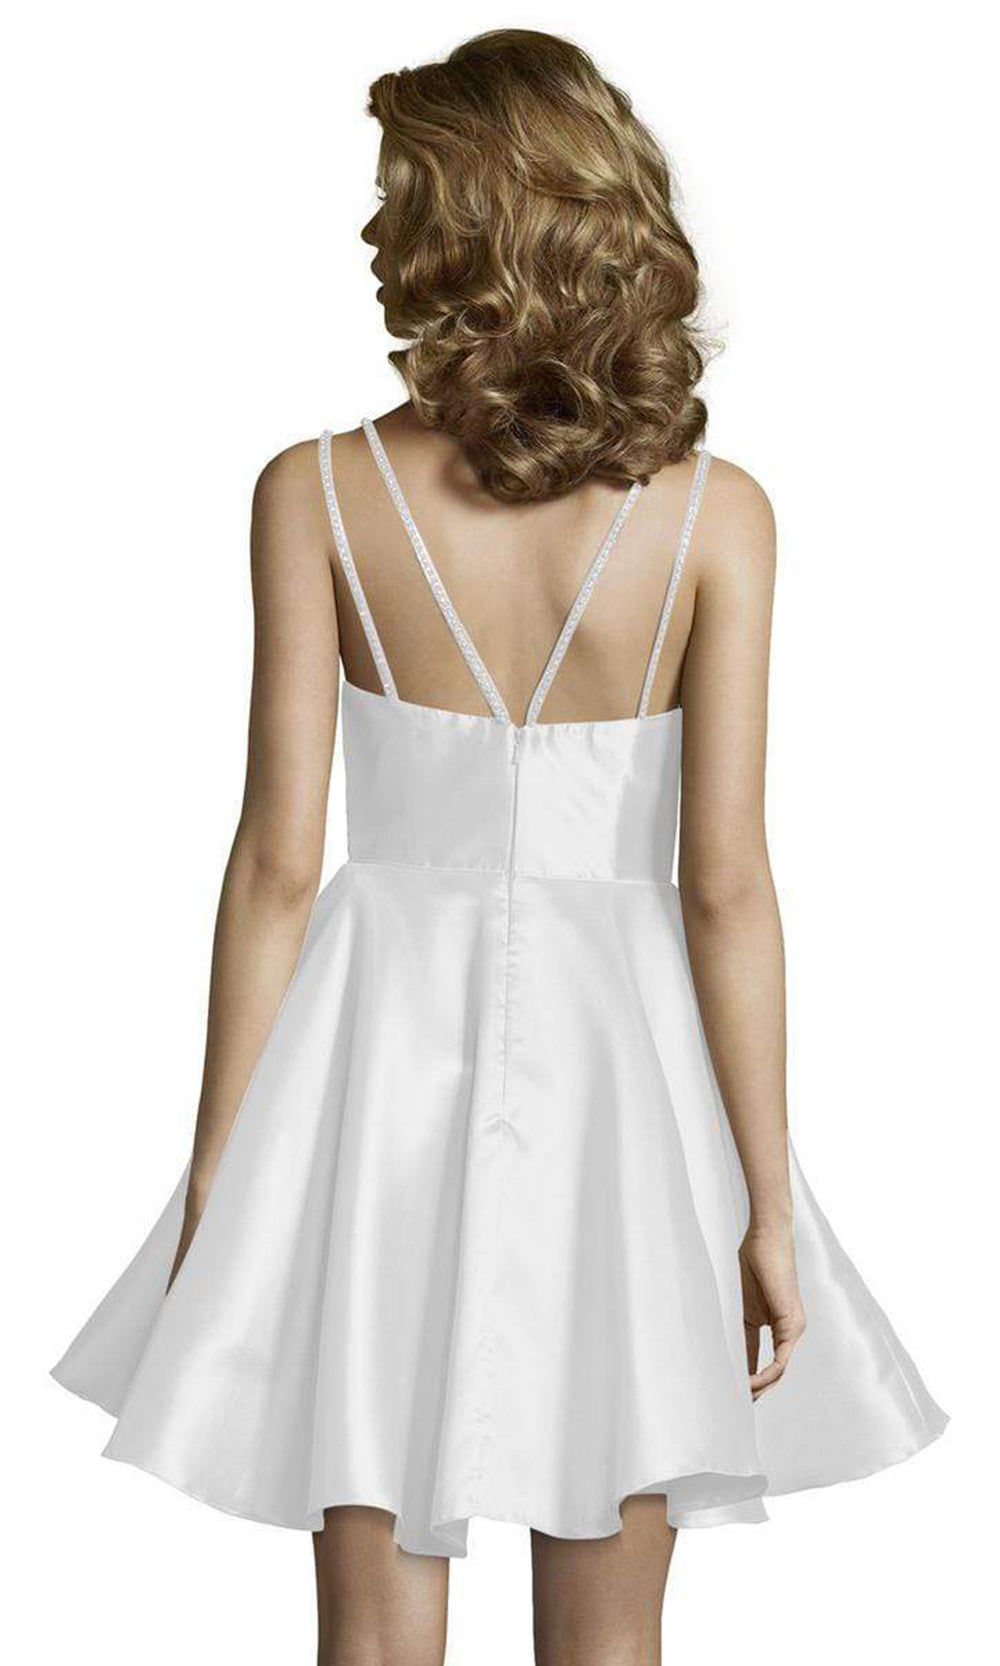 Alyce Paris Beaded Straps Fit and Flare Cocktail Dress 3769 - 1 pc Diamond White In Size 6 Available CCSALE 6 / Diamond White